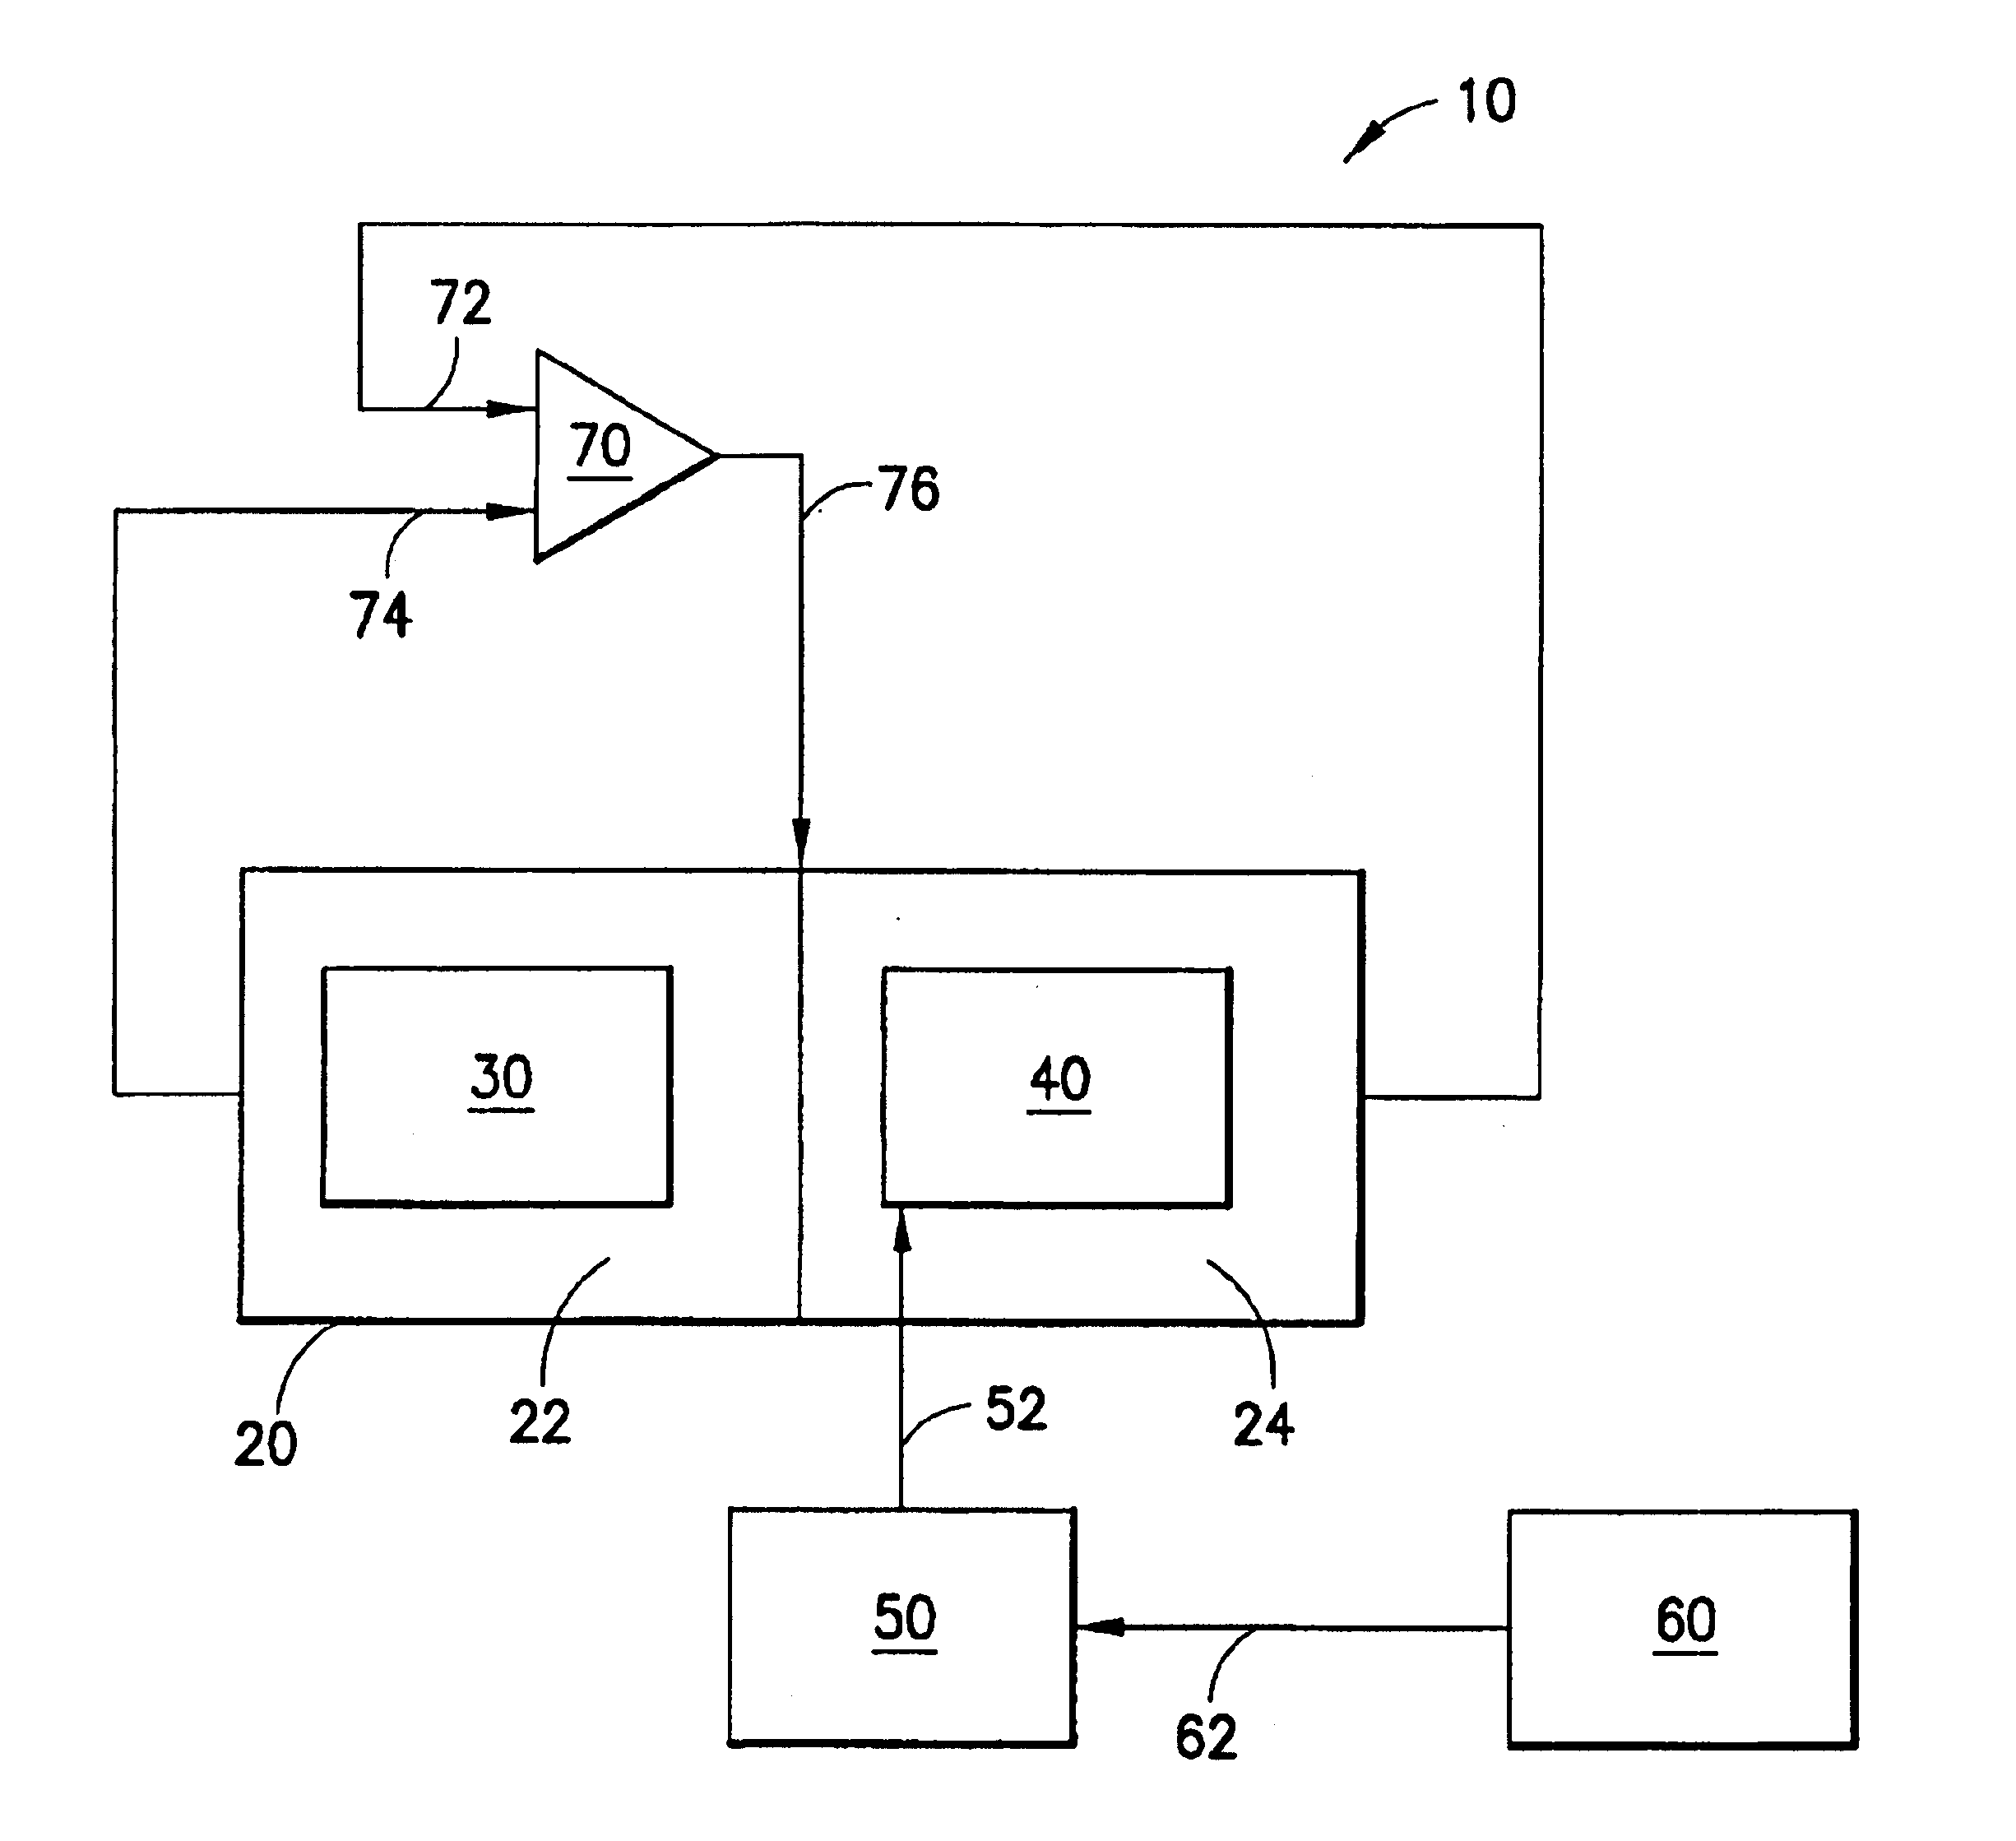 Fluid velocity sensor with heated element kept at a differential temperature above the temperature of a fluid